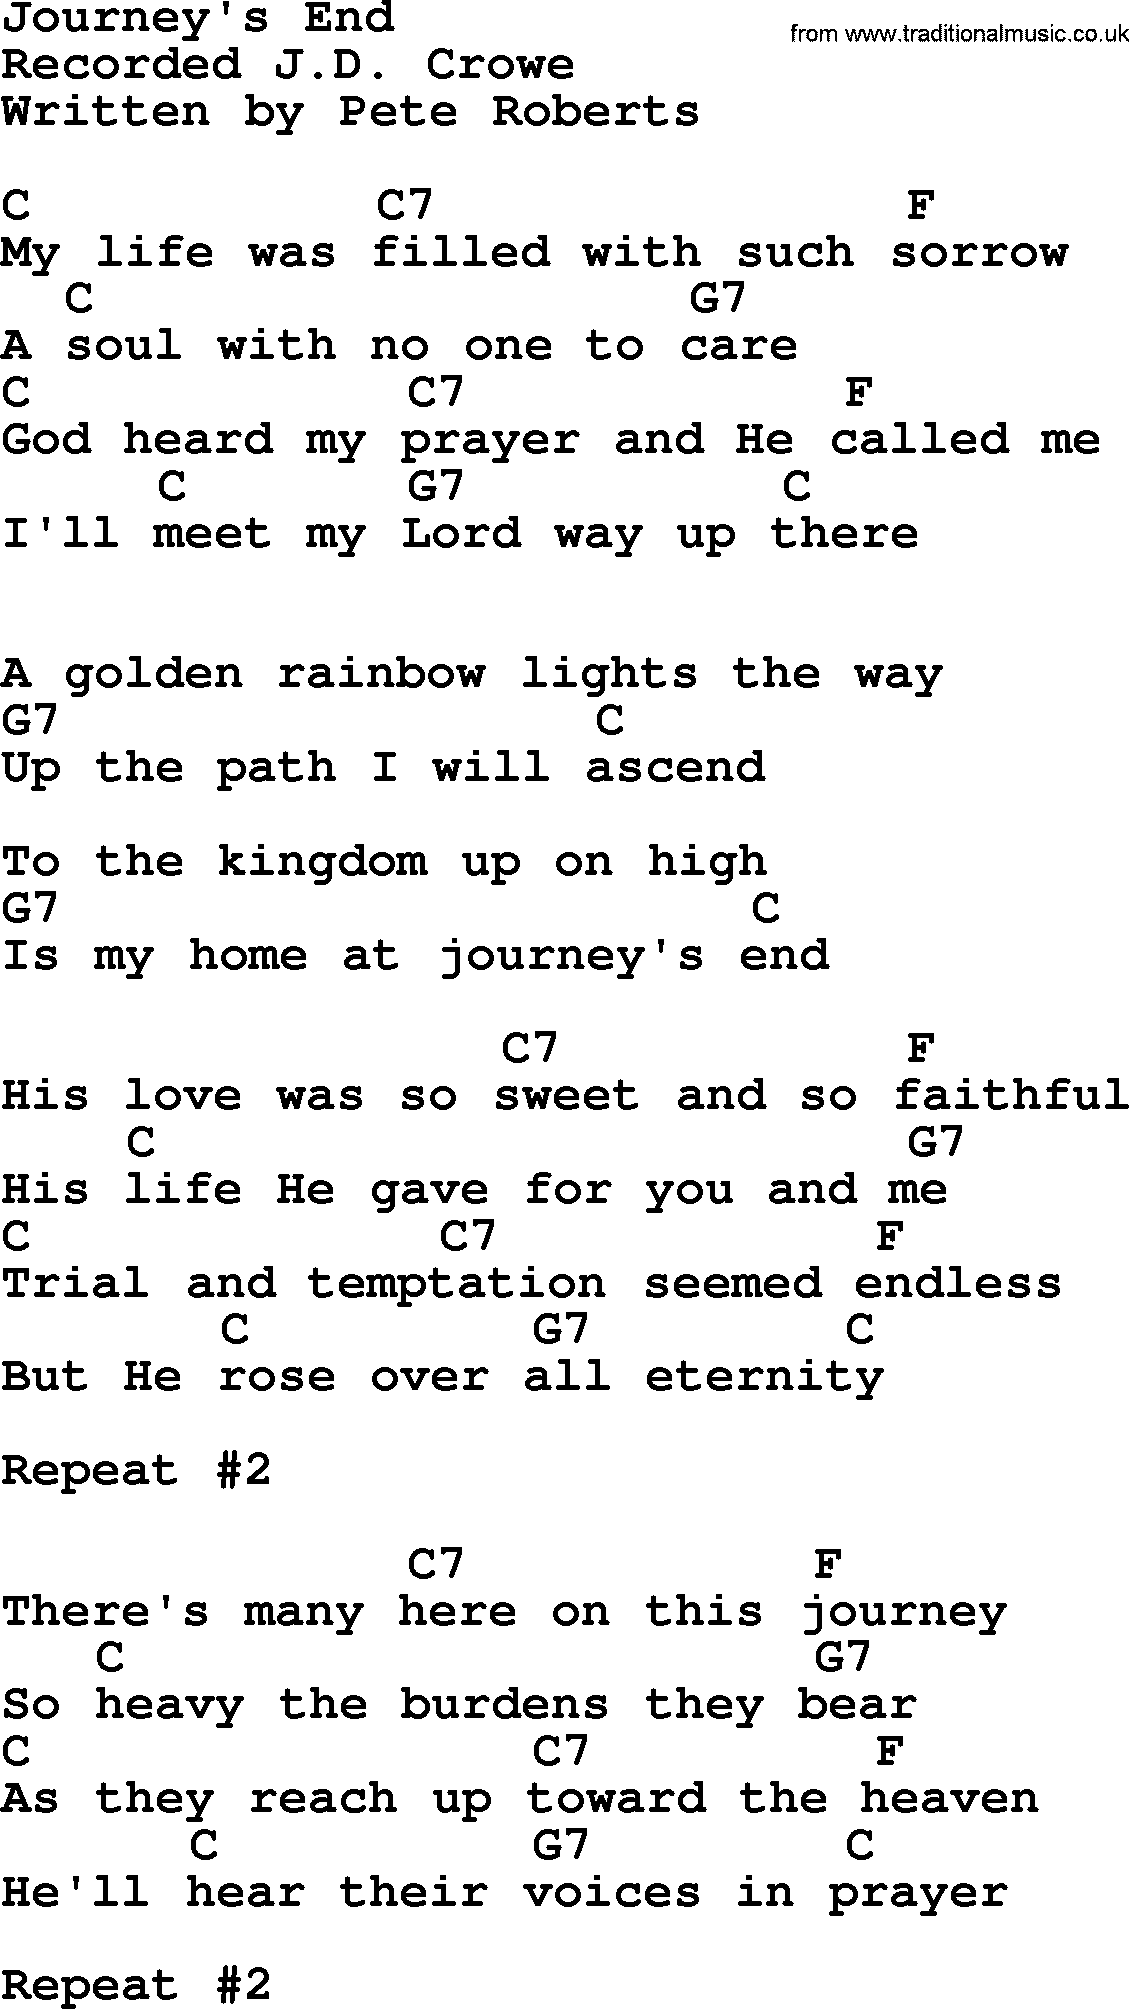 Bluegrass song: Journey's End, lyrics and chords